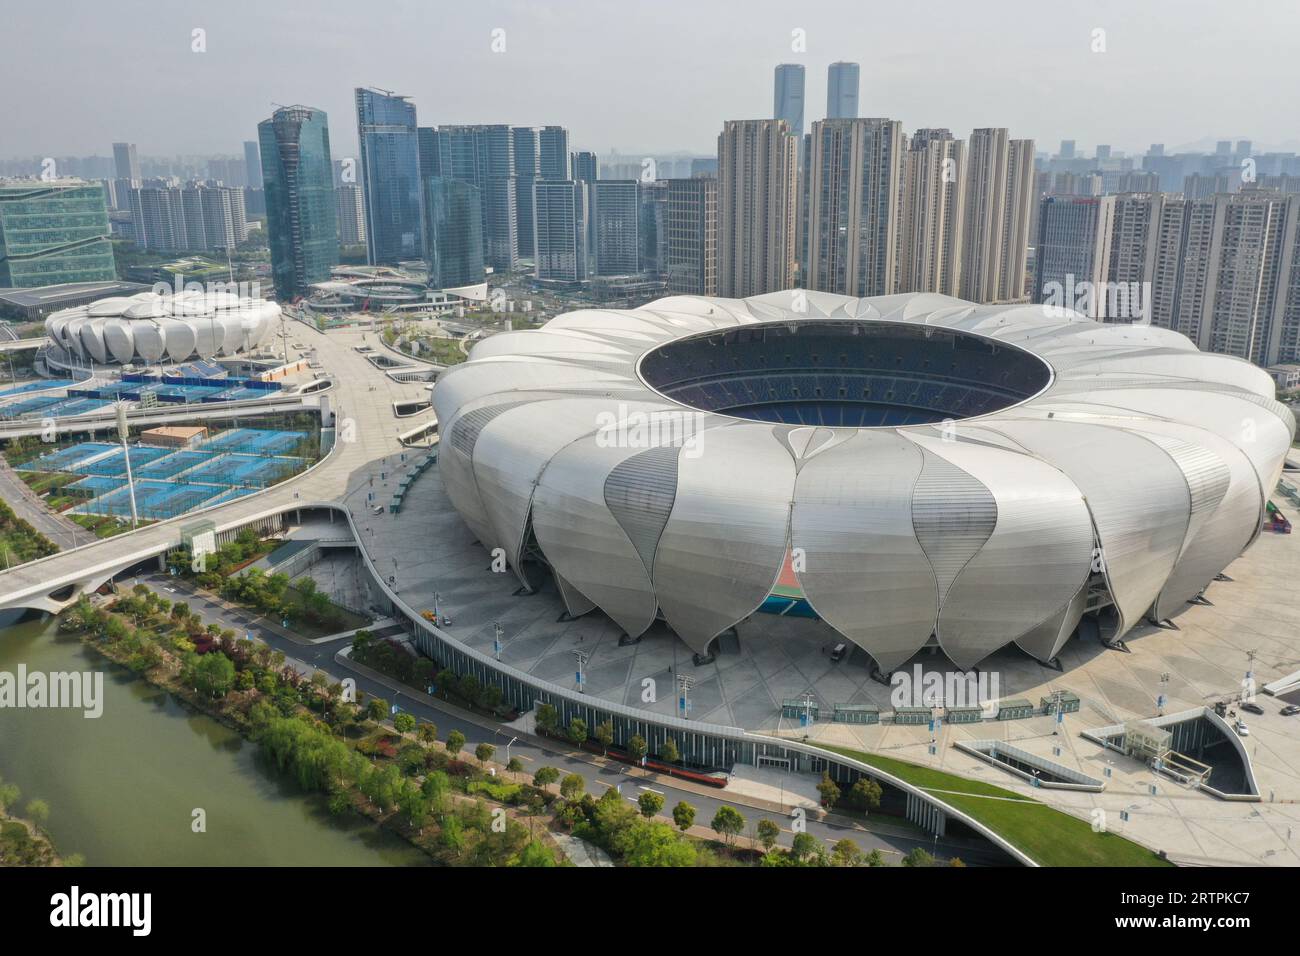 Hangzhou. 30th Mar, 2022. This aerial photo taken on March 30, 2022 shows the Hangzhou Olympic Sports Center's main stadium (R) and Tennis Center in Hangzhou, east China's Zhejiang Province. The 19th Asian Games will take place in Hangzhou between September 23 and October 8, featuring a total of 40 sports. It will be the third Asian Games to be hosted in China, after Beijing 1990 and Guangzhou 2010. The highly anticipated Asian Games can help boost the popularity of Hangzhou where history and modernity co-exist and further promote its culture. Credit: Huang Zongzhi/Xinhua/Alamy Live News Stock Photo